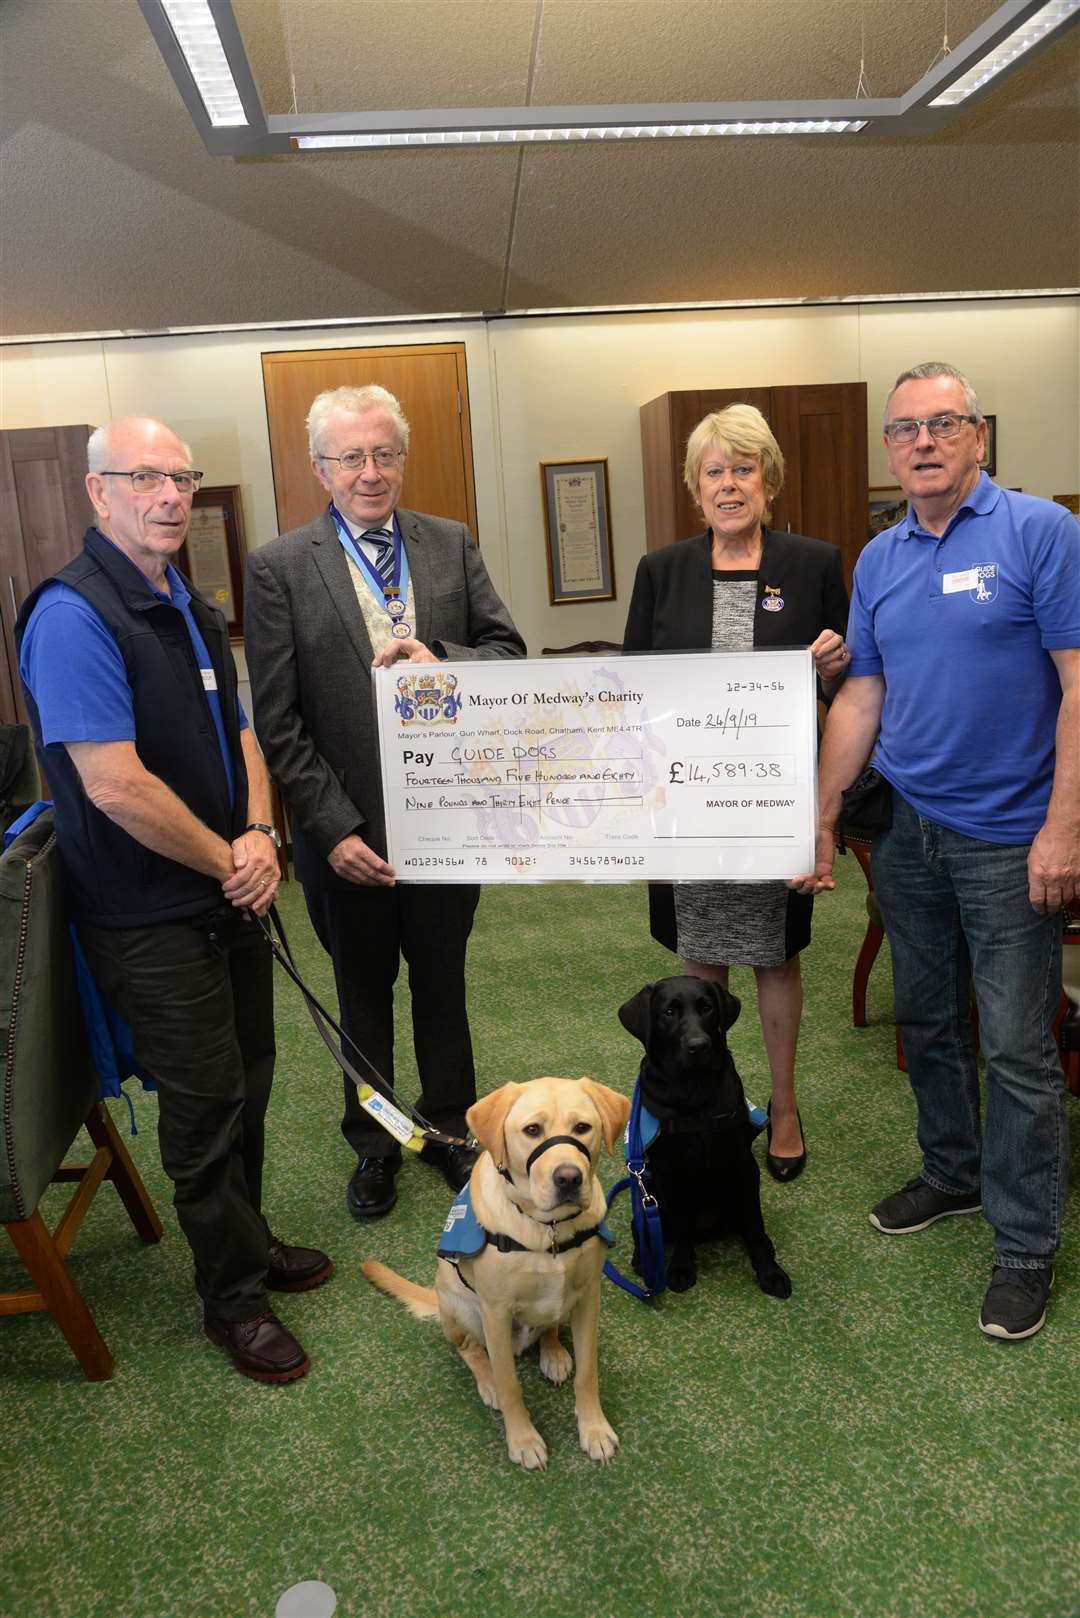 Puppy walkers Dan O'Donoghue with Simba and Brian Byers with Clodah and Steve and Josie Iles at a Guide Dogs for the Blind cheque presentation in 2019